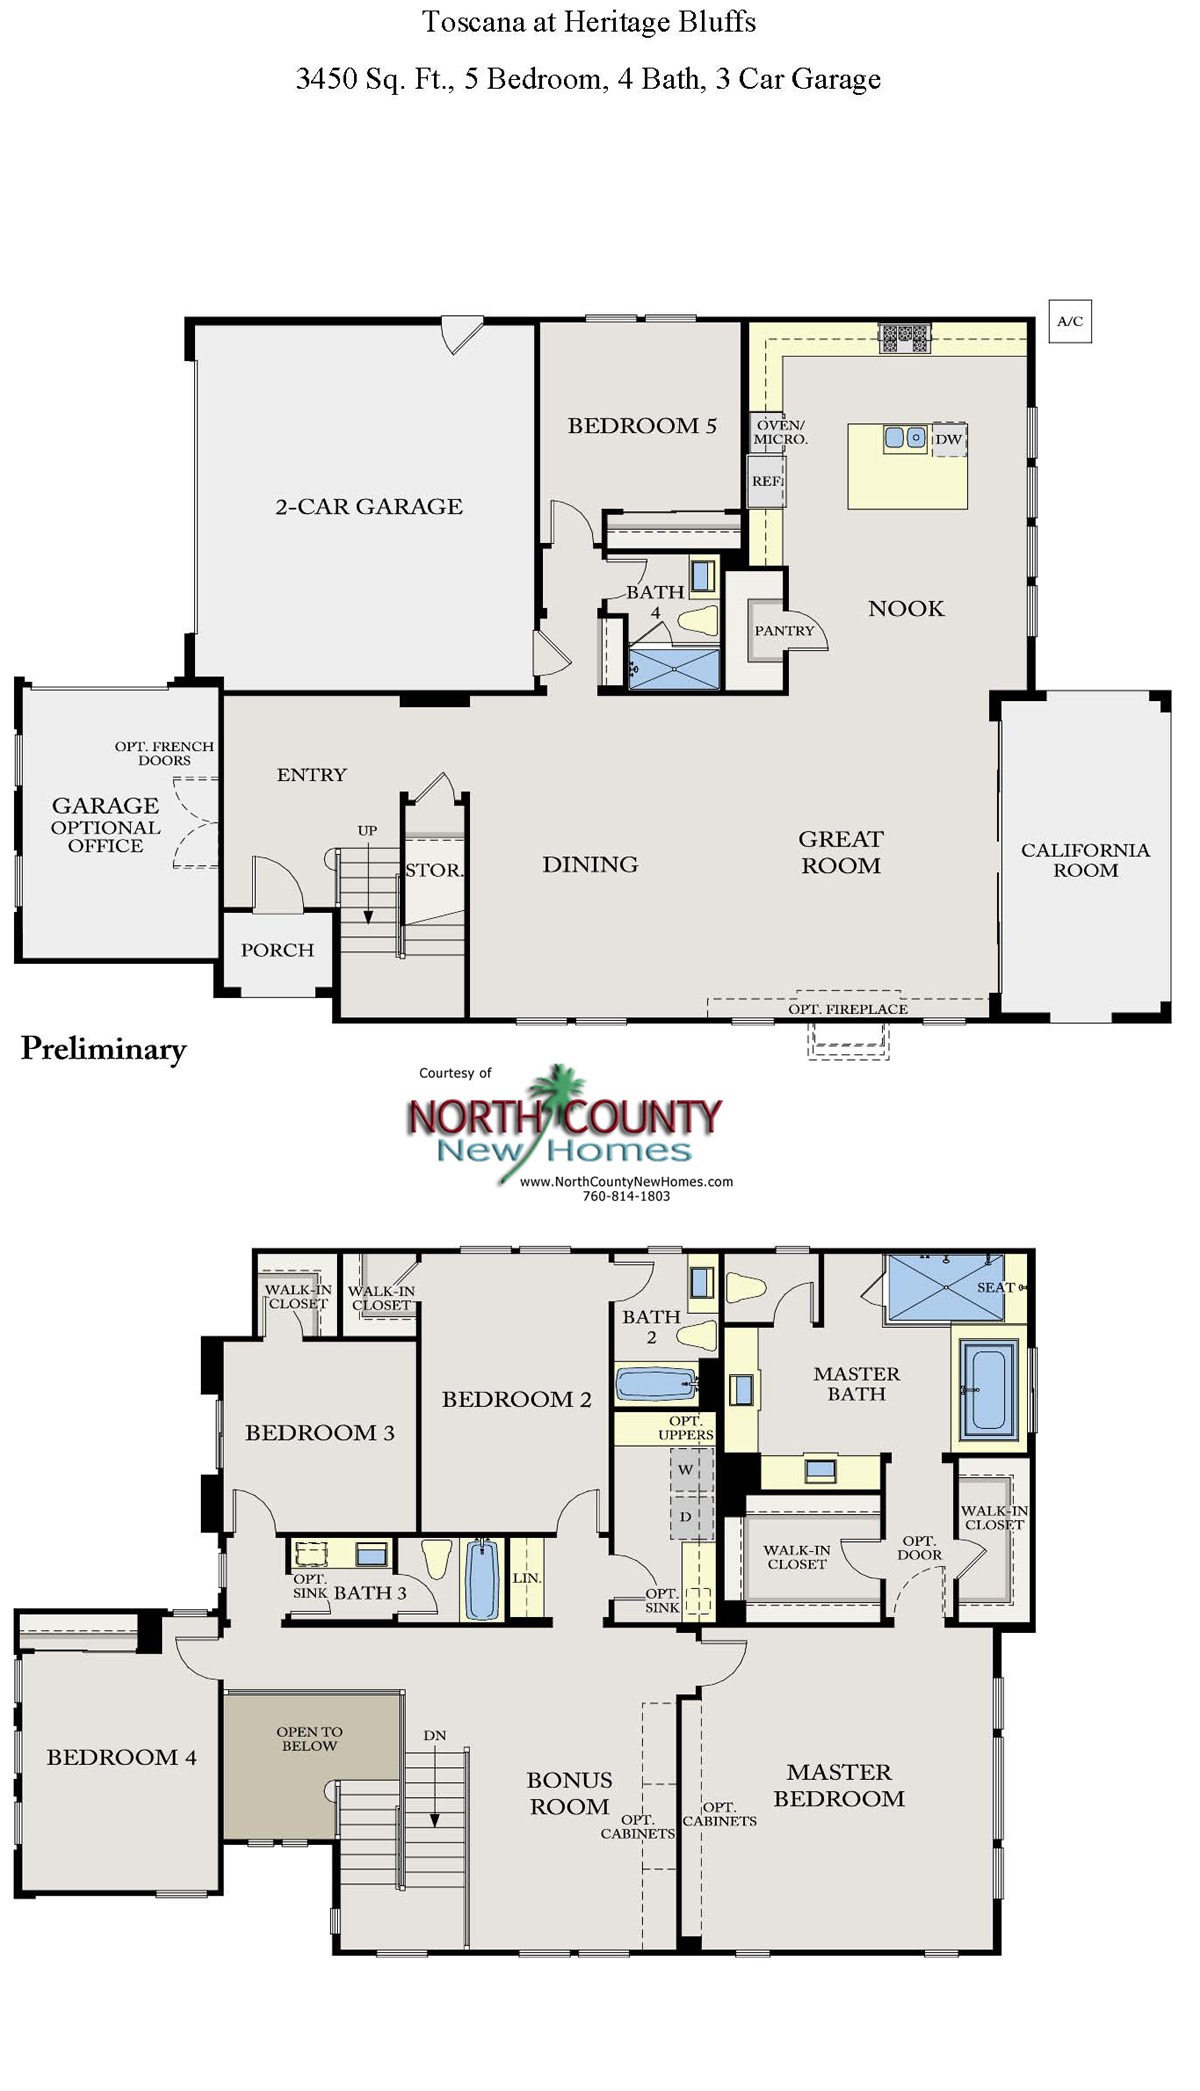 Toscana at Heritage Bluffs Floor Plan 3 North County New